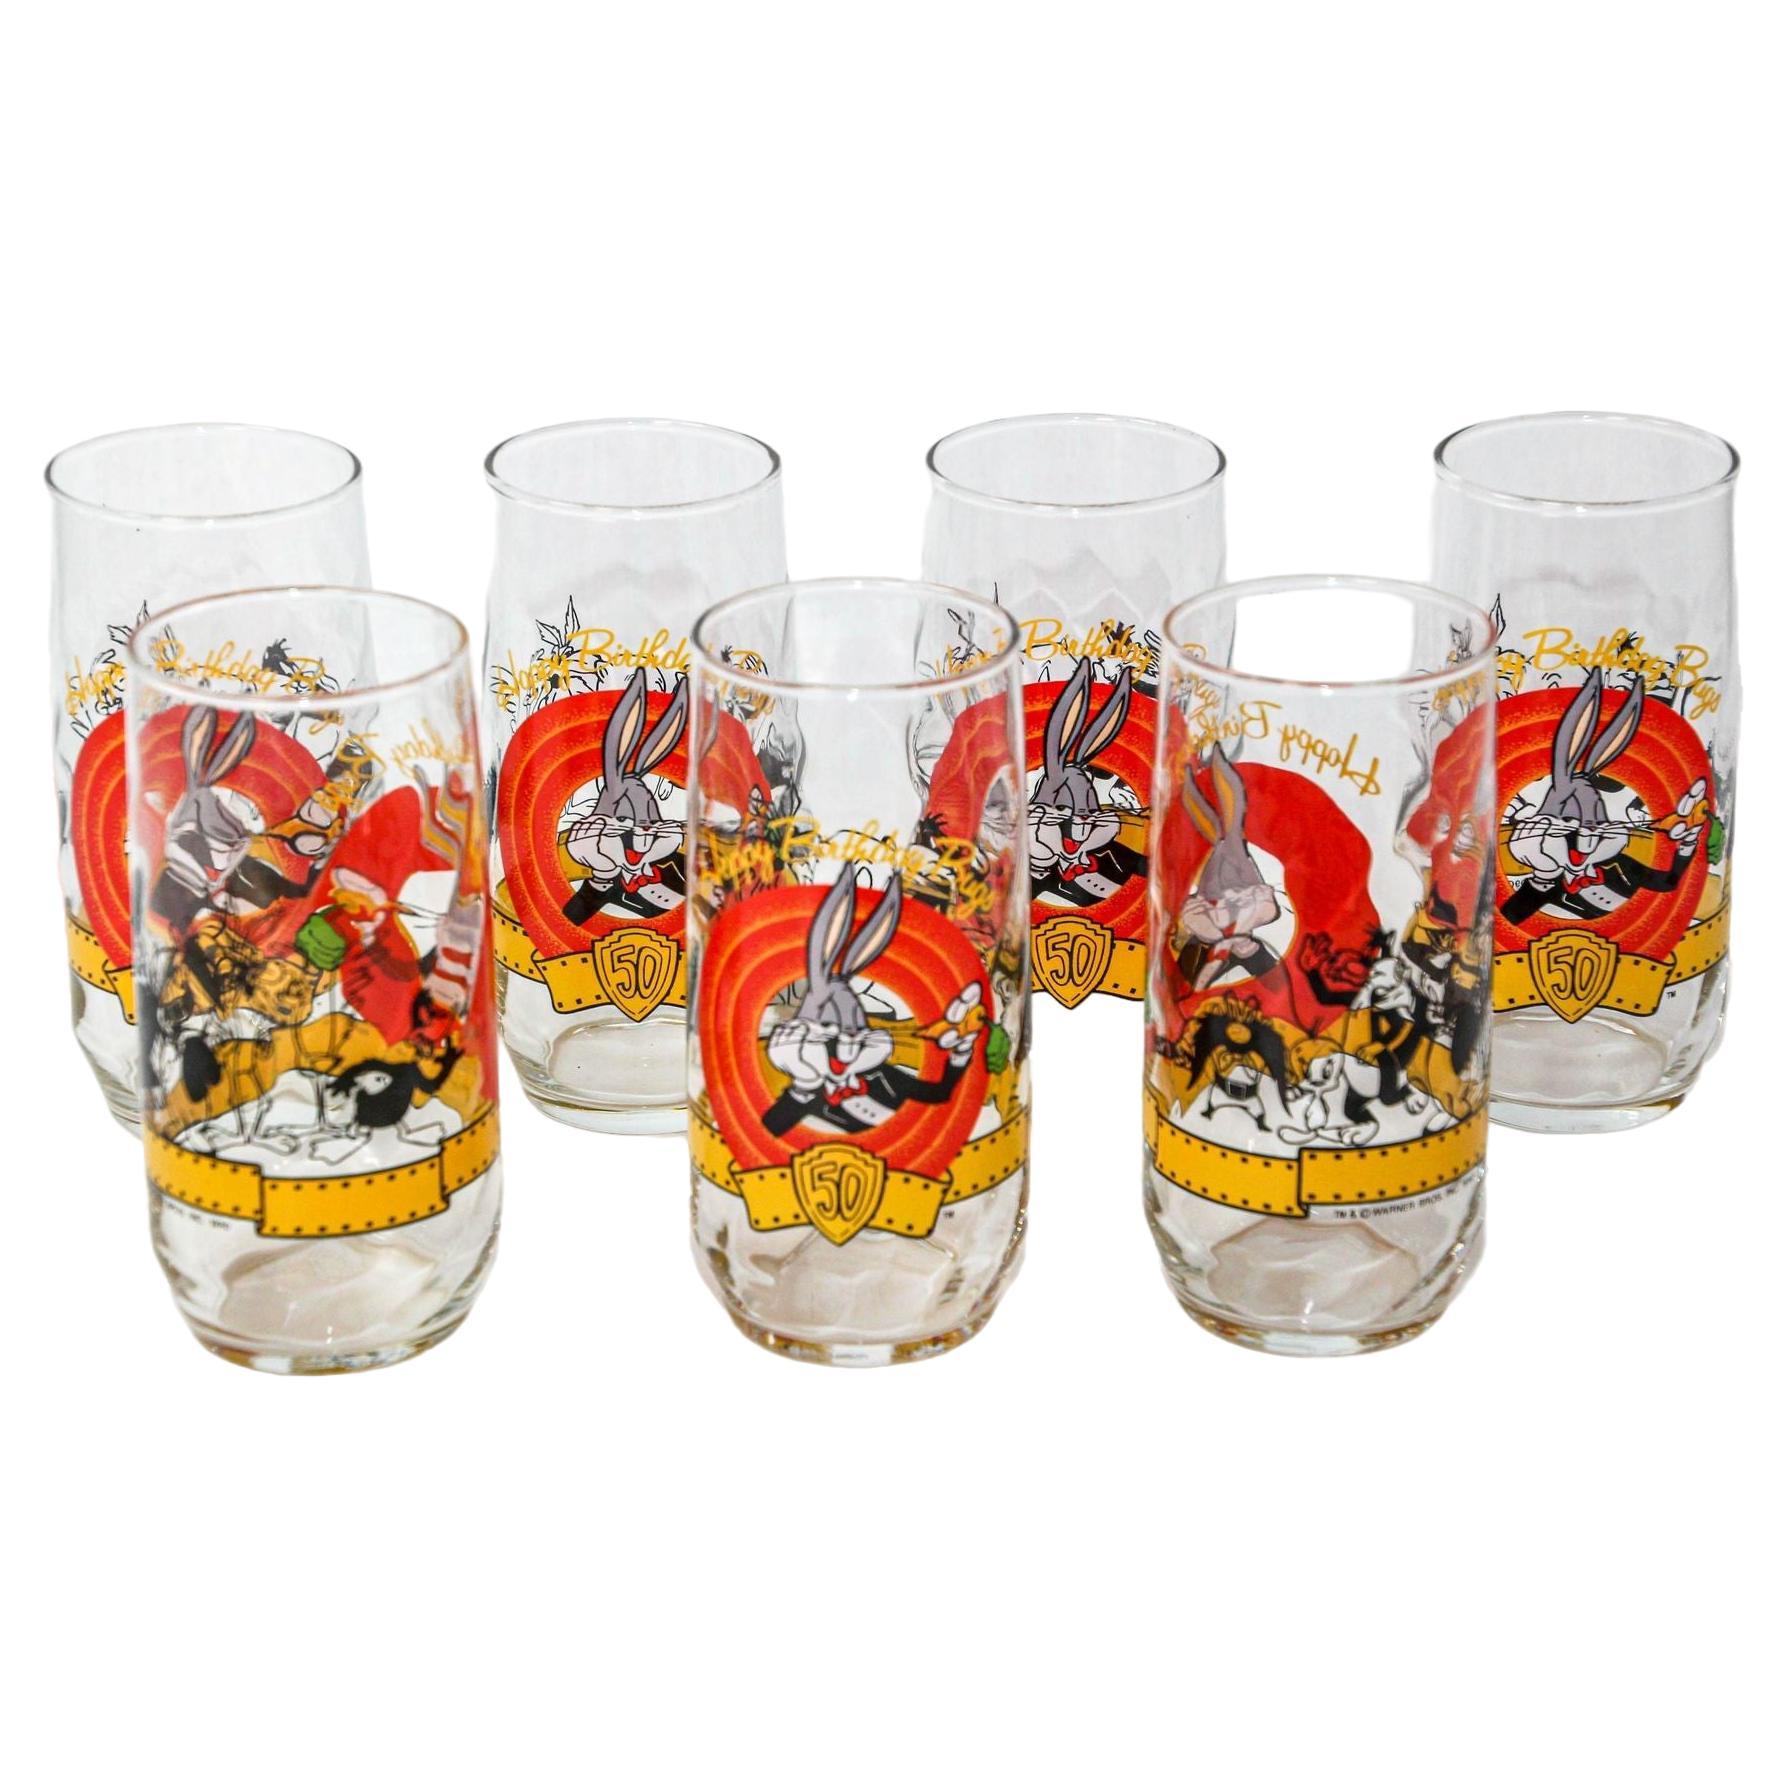 1990s Bugs Bunny Happy 50th Birthday Collectible Drinking Glasses Warner Bros For Sale